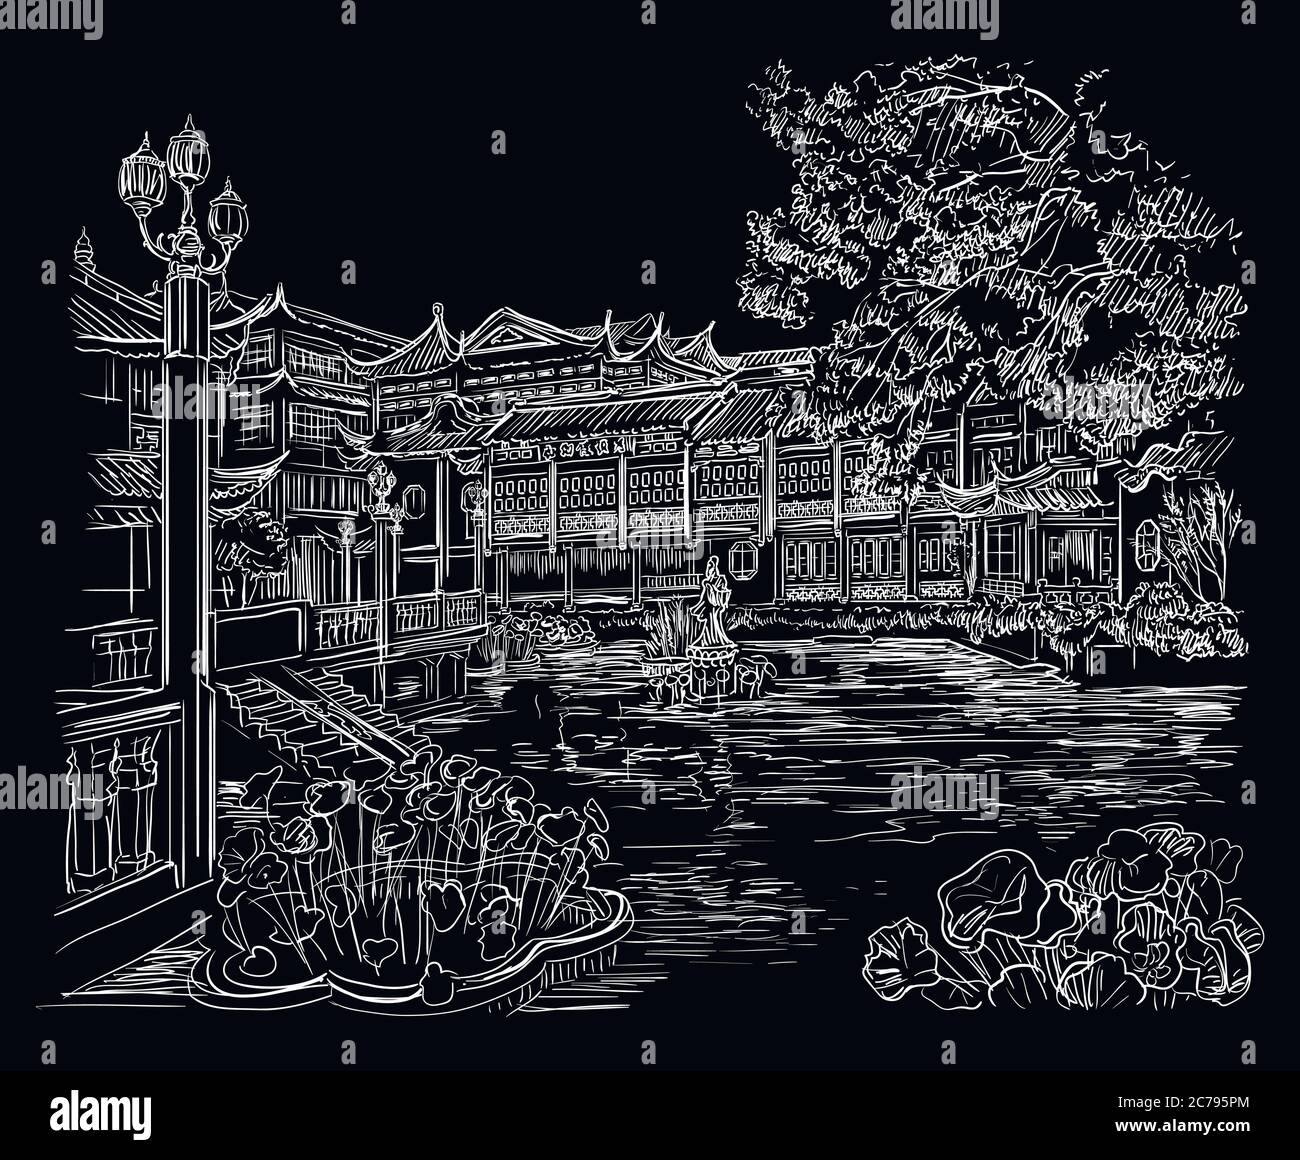 Yuyuan Garden (Garden of Happiness), Old City of Shanghai, landmark of China. Hand drawn vector sketch illustration in white color isolated on black b Stock Vector